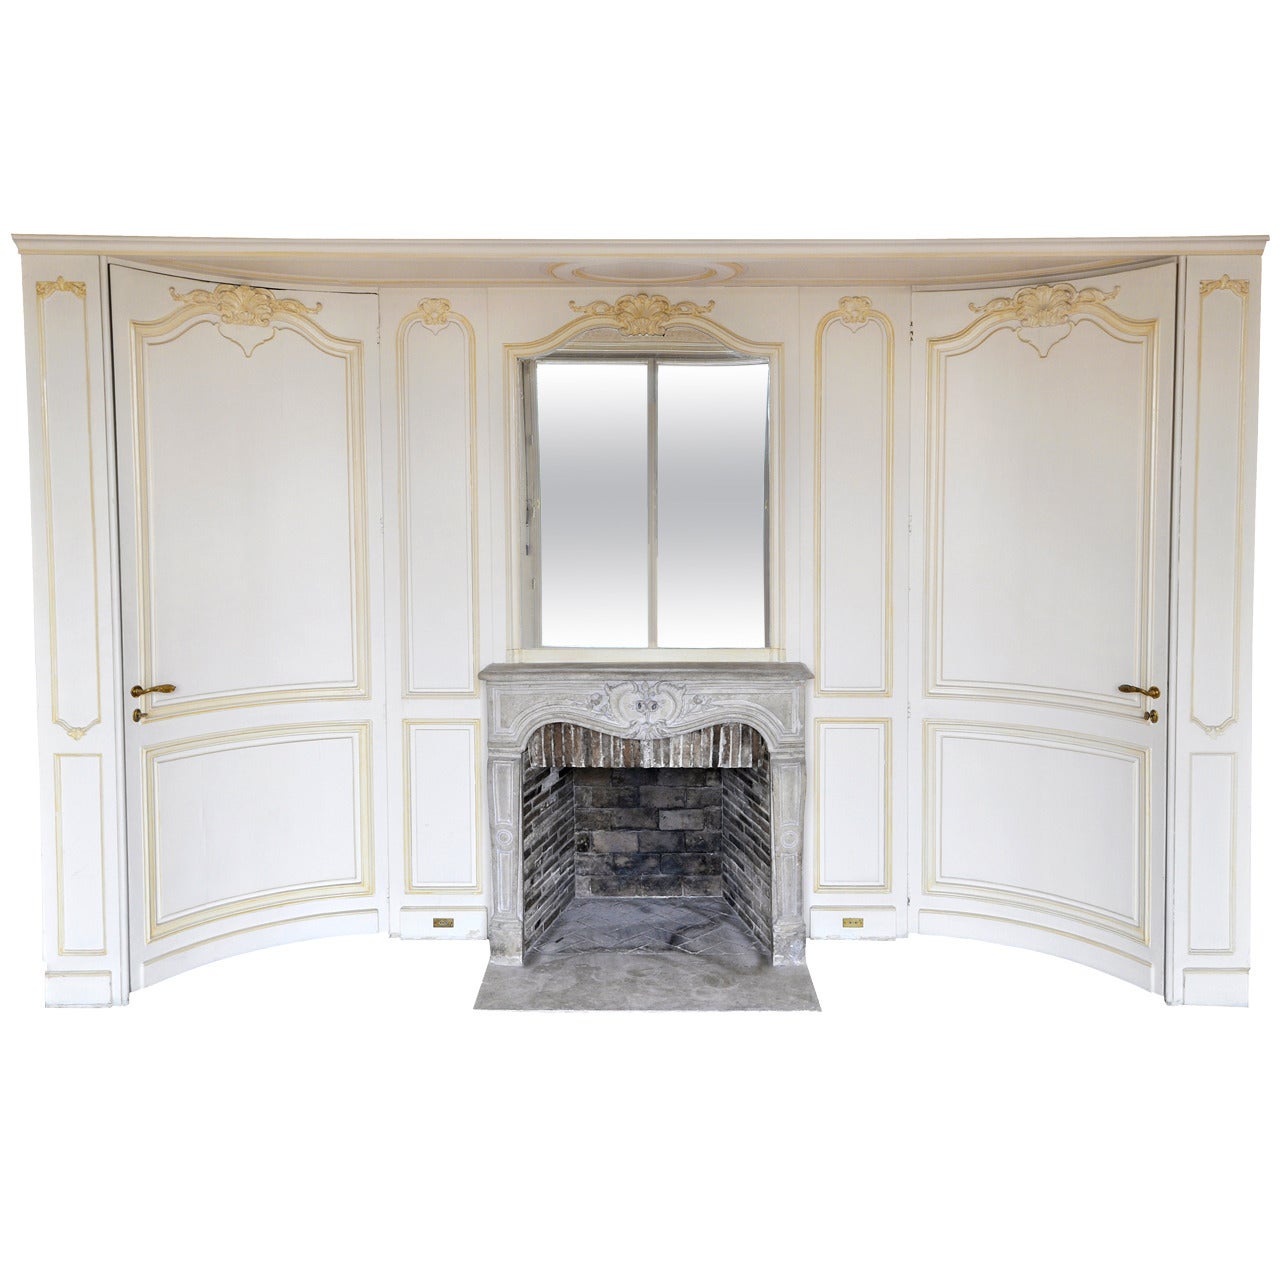 Early 20th Century Curved Paneled Room and 18th Century Louis XV Stone Fireplace For Sale